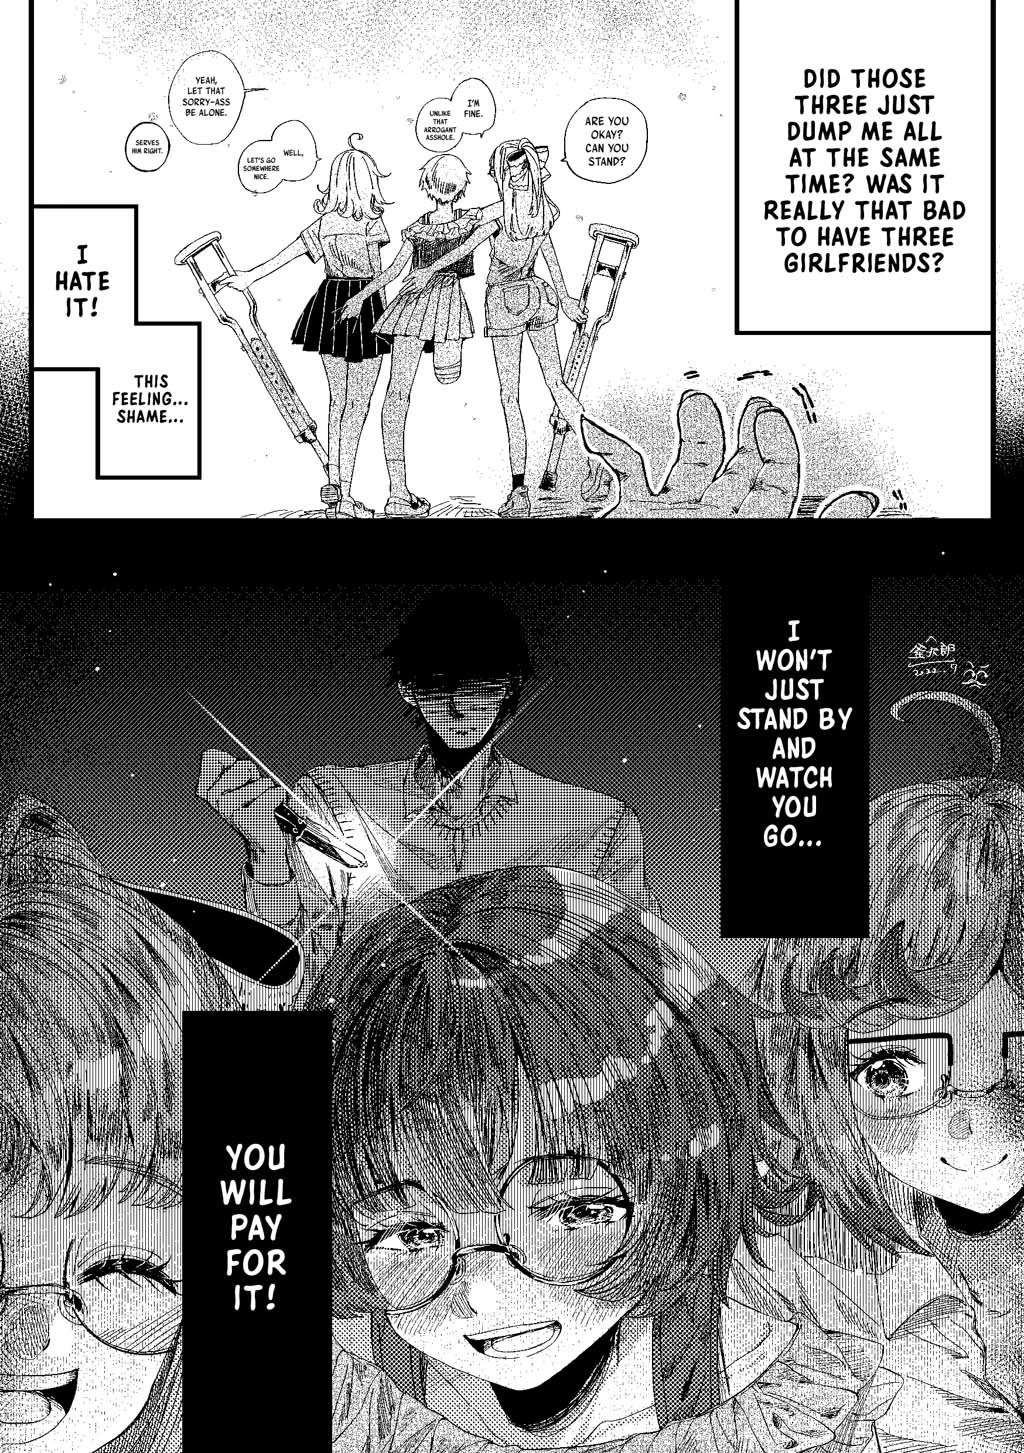 Cute And Lovable Girl Doesn't Deserve To Be Treated Poorly - chapter 10 - #1